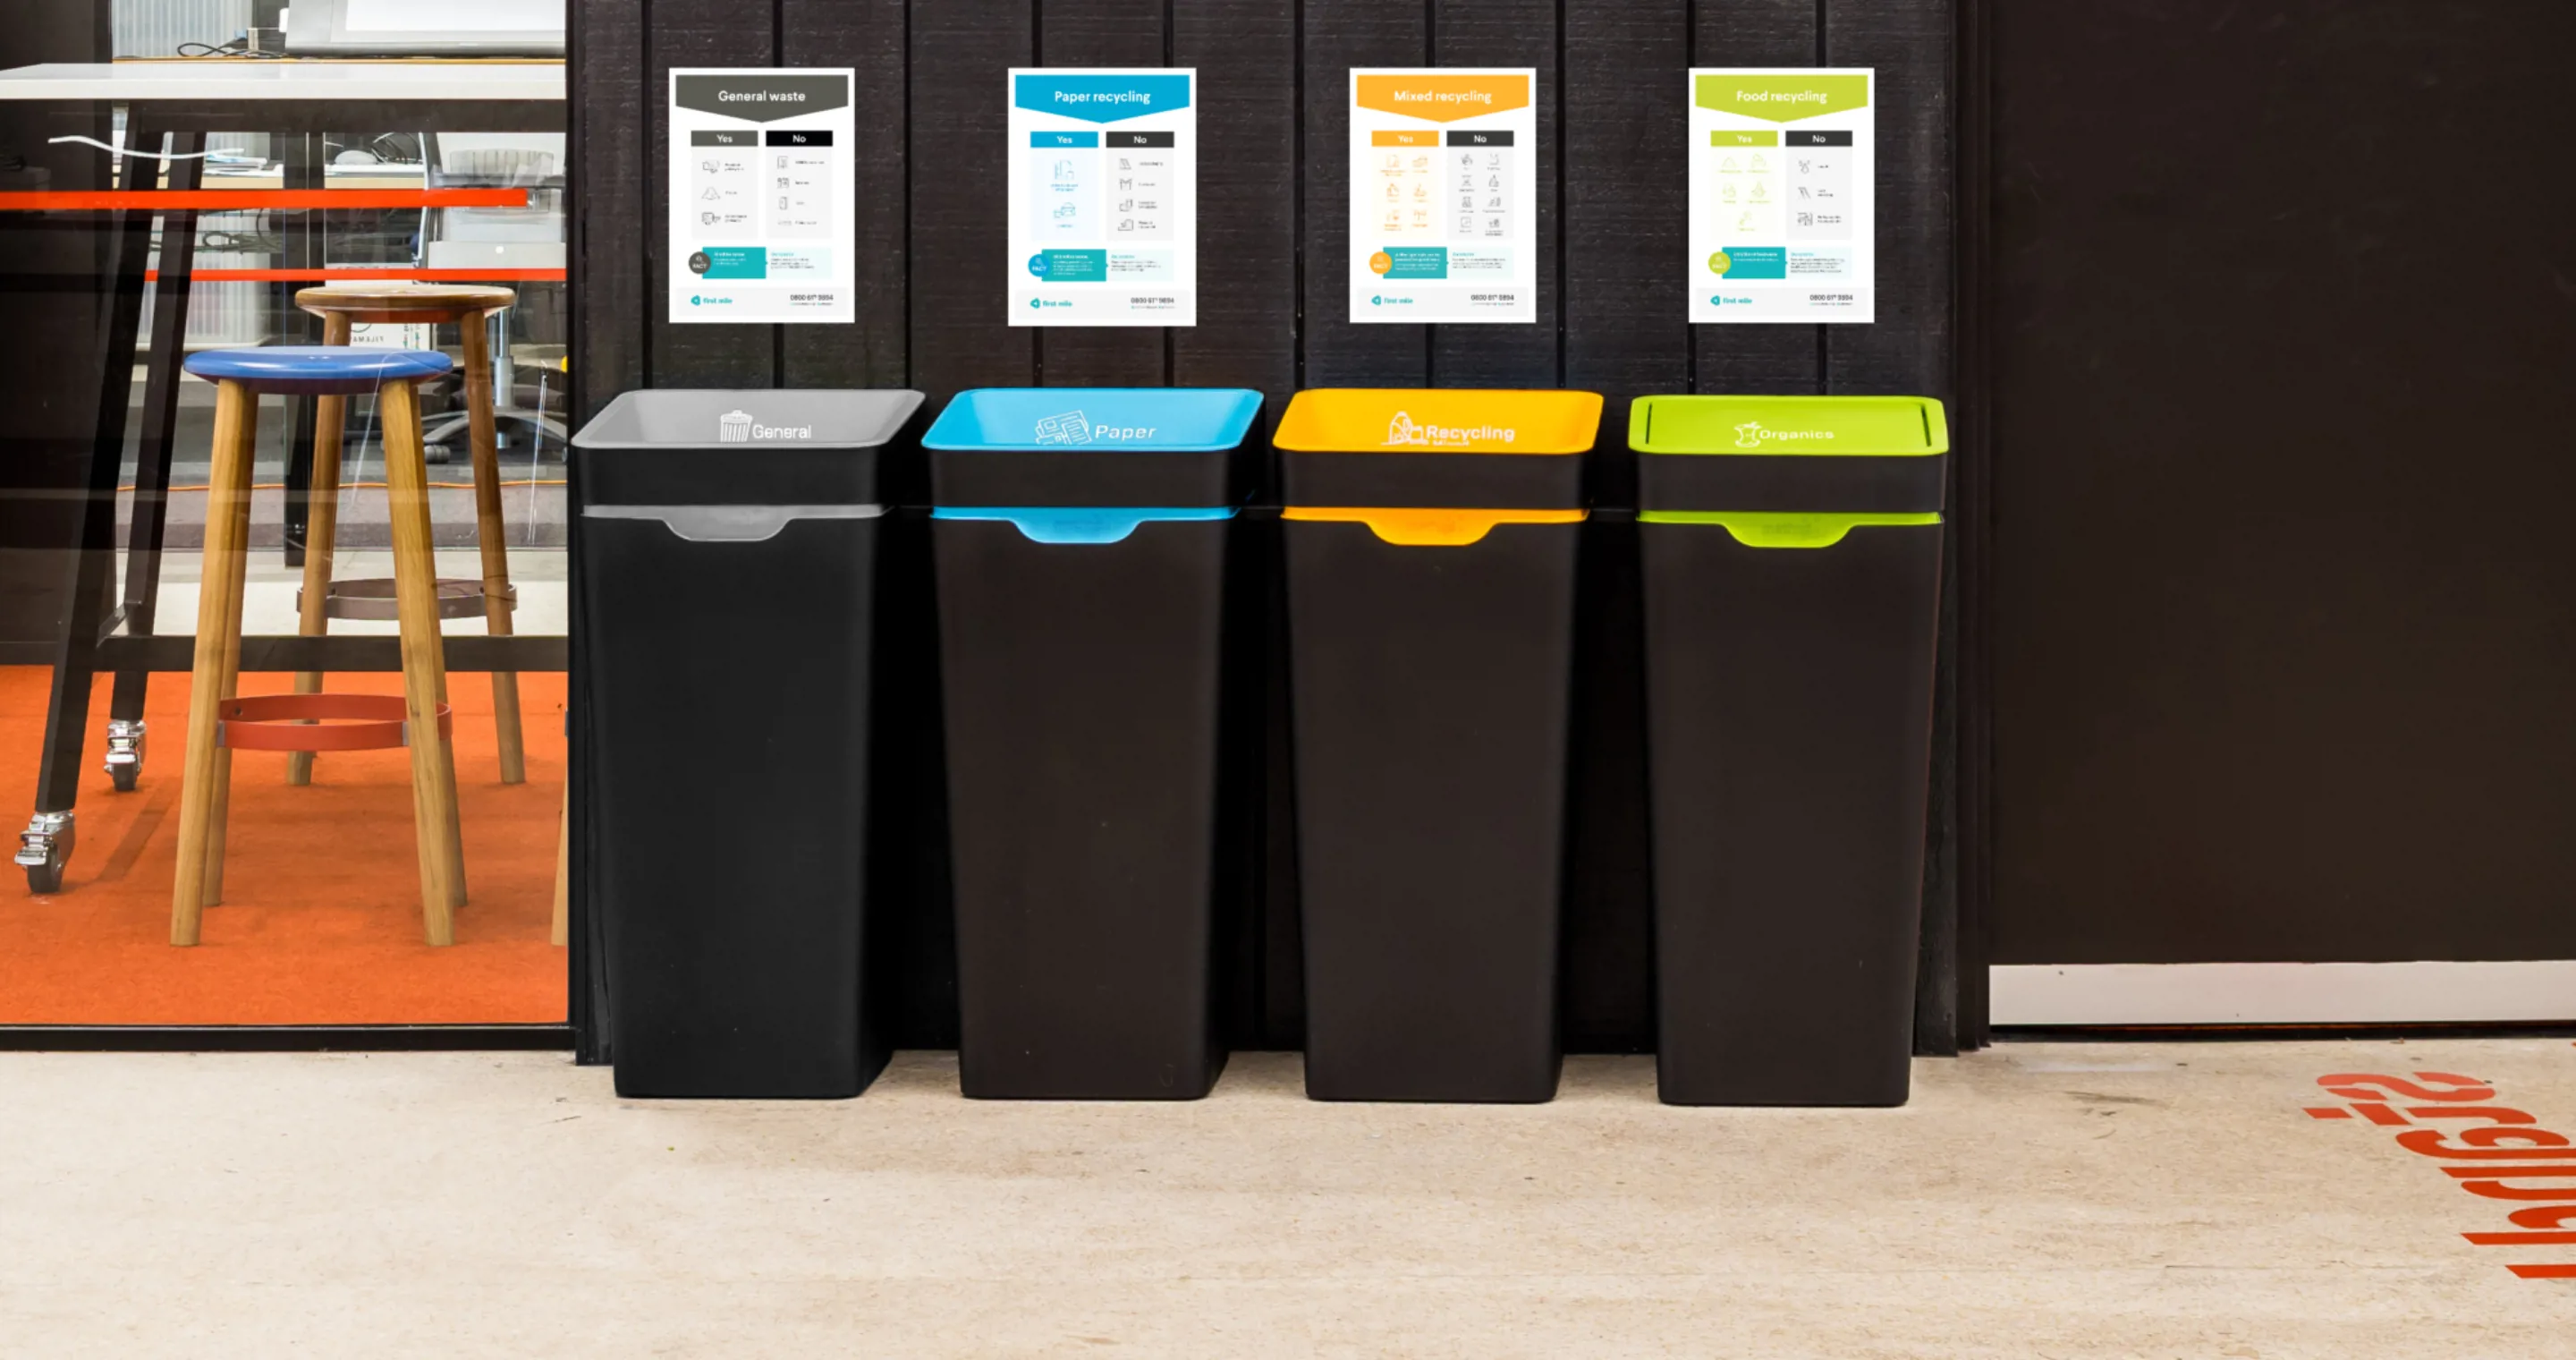 A row of four recycling bins with instructional posters posted above them. The bins are black with different coloured lids.